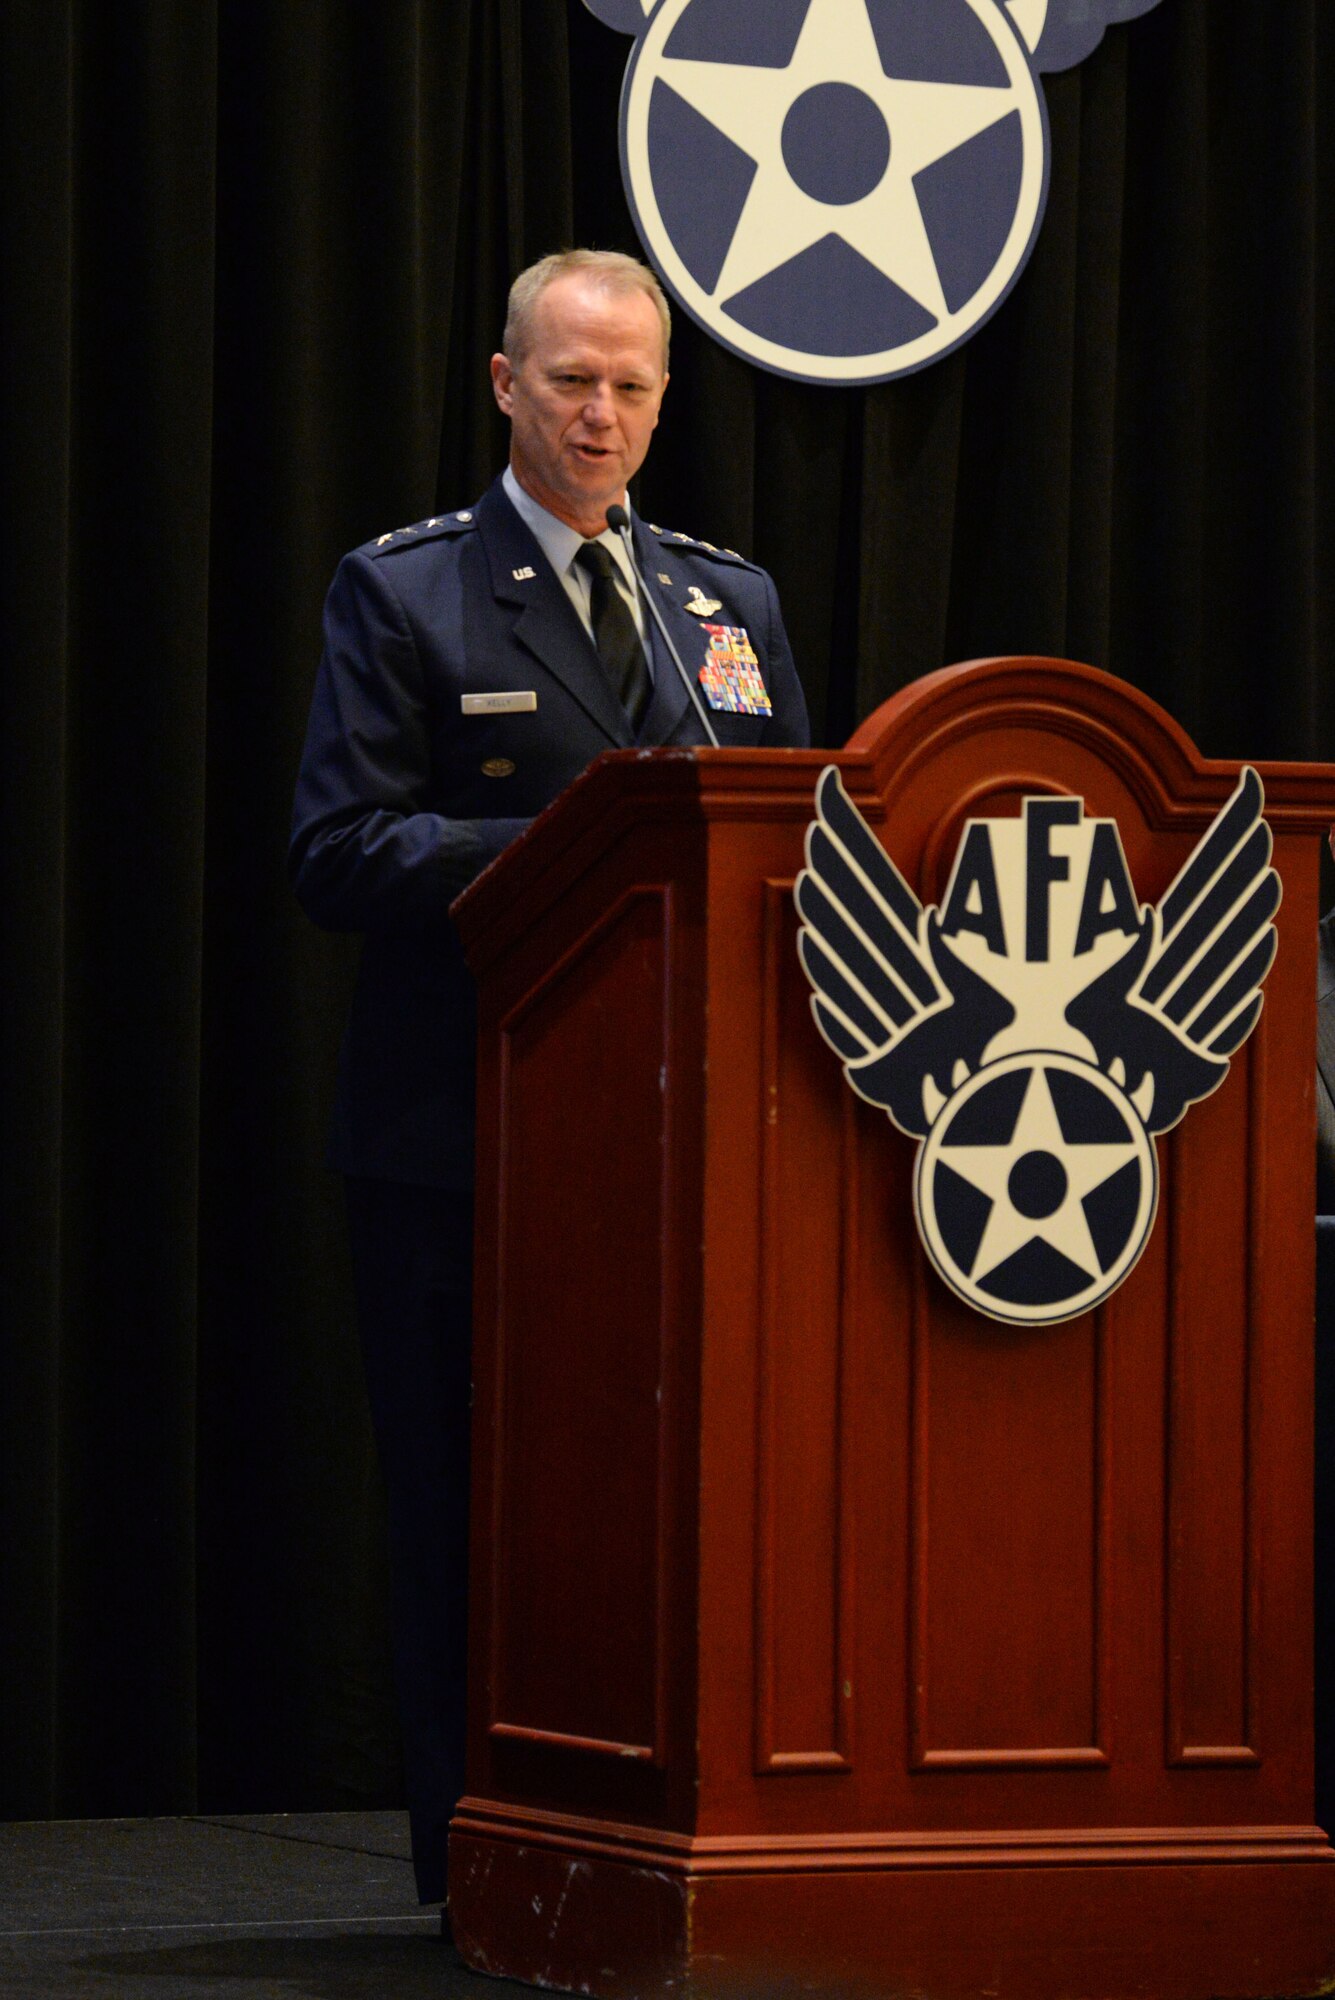 Lt. Gen. Mark D. Kelly, Air Force deputy chief of staff or operations, delivers his speech on “The Force We Present” during the Air Force Association’s Air, Space and Cyber Conference Sept. 17, 2018, in National Harbor, Md. The Air, Space and Cyber Conference is a professional development conference that offers an opportunity for Department of Defense personnel to participate in forums, speeches, seminars and workshops. (U.S. Air Force photo by Airman 1st Class Zoe M. Wockenfuss)